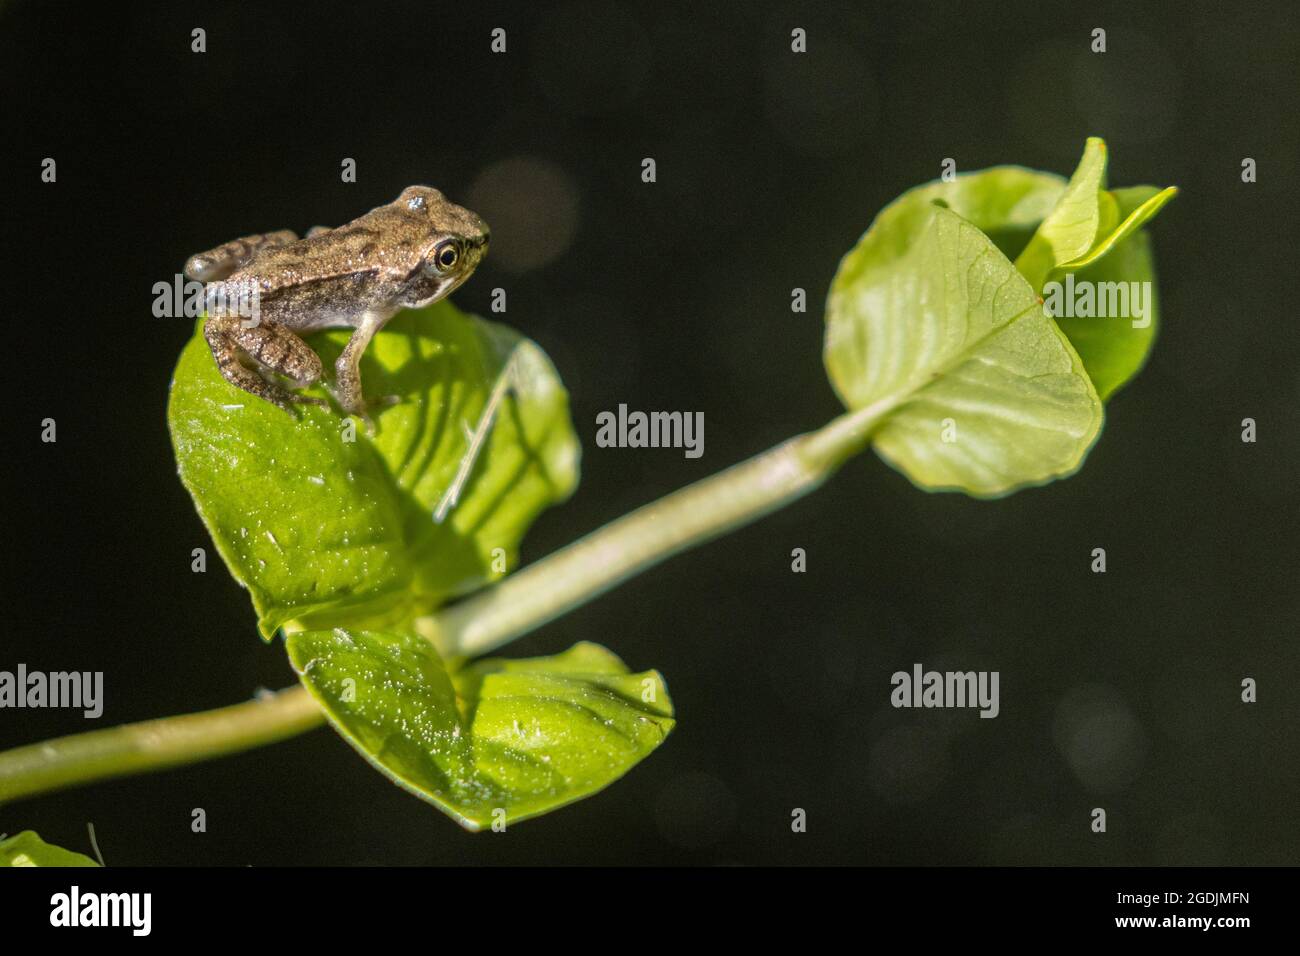 common frog, grass frog (Rana temporaria), 10mm, after completed metamorphosis, Germany, Bavaria Stock Photo